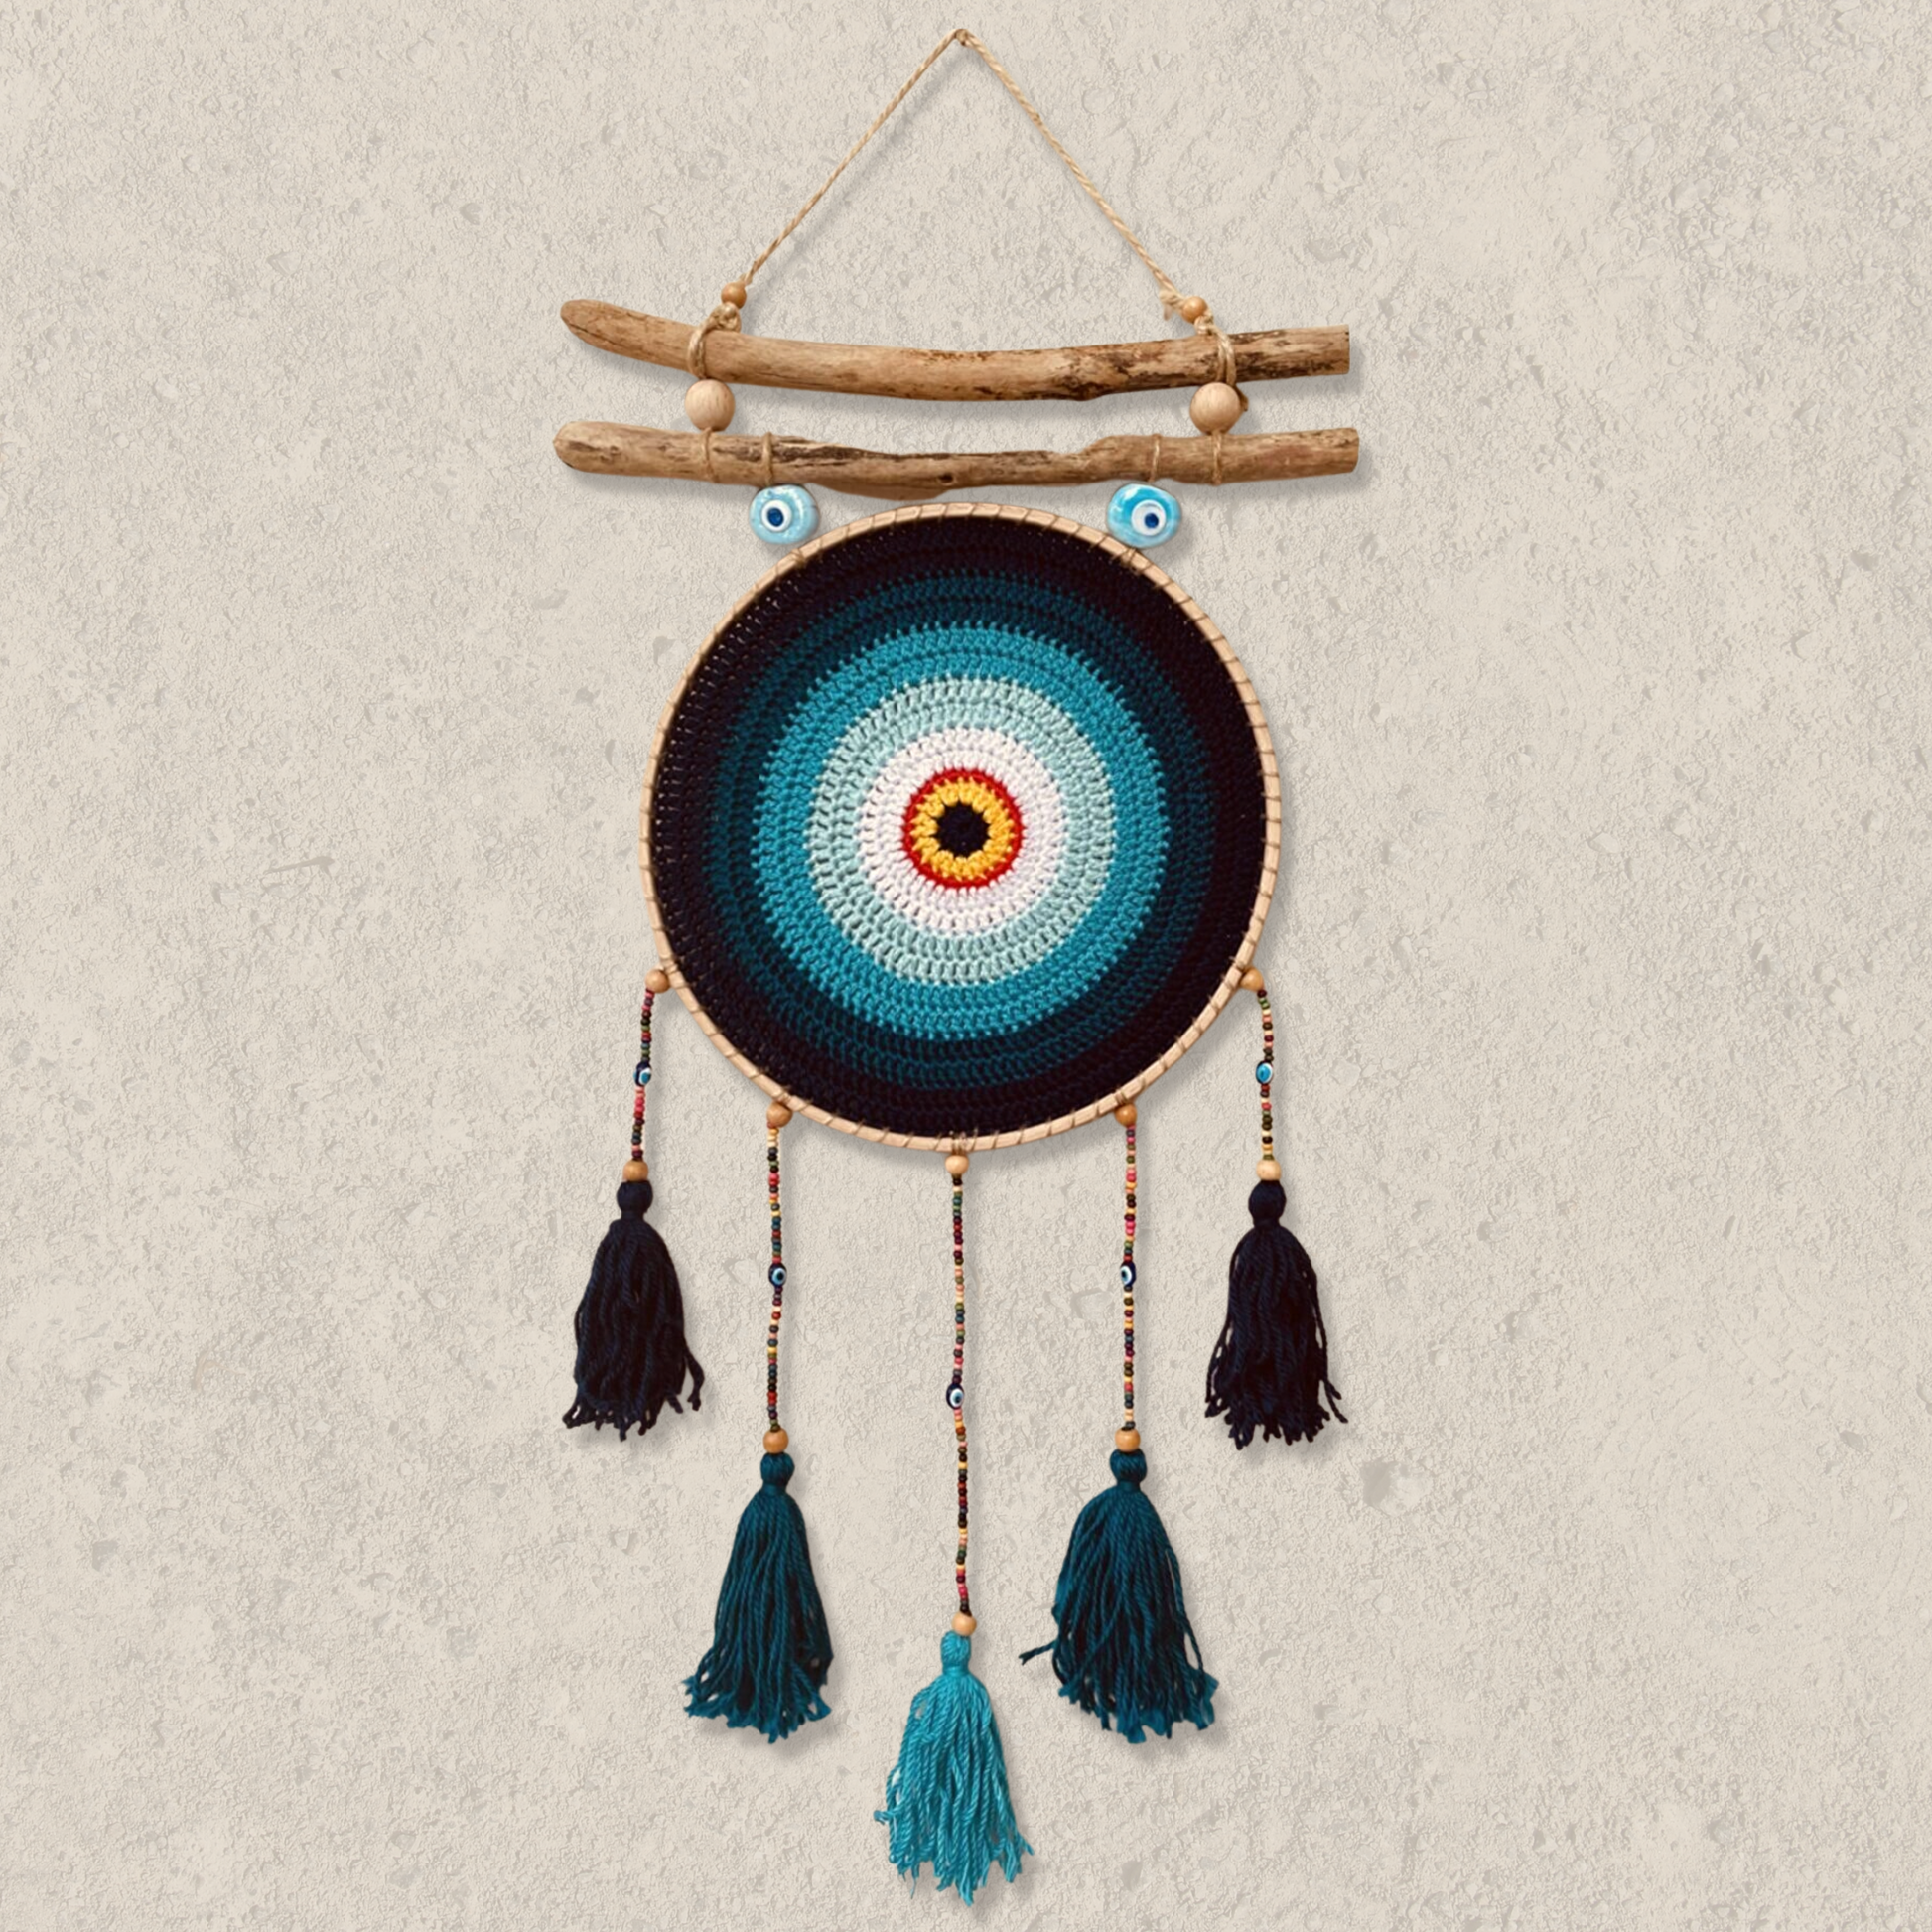 Large blue evil eye dreamcatcher hanging on a wall